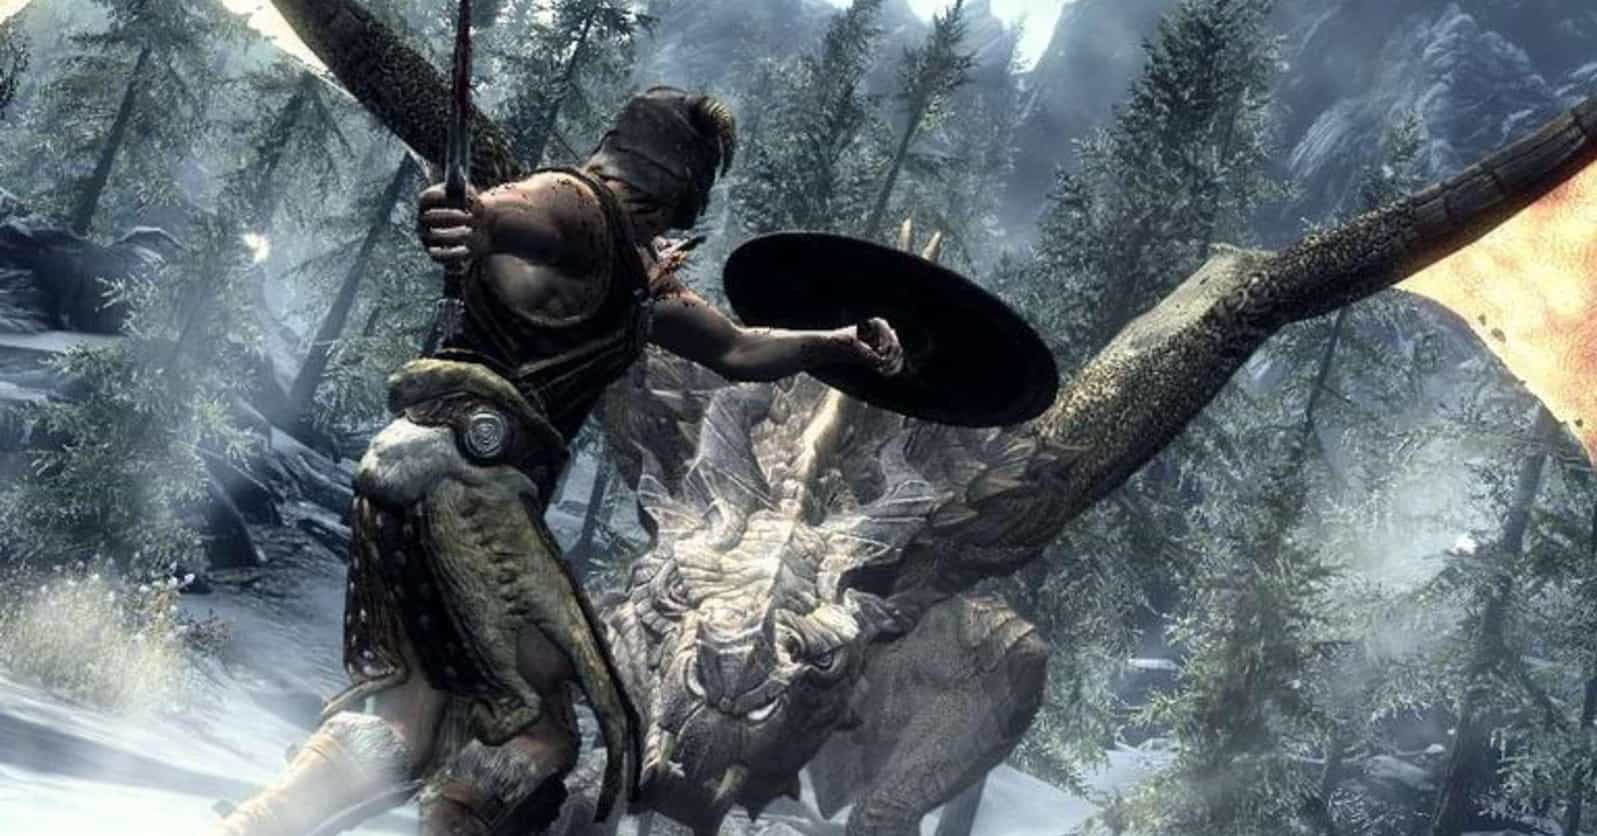 The Best Fantasy Games Of All Time